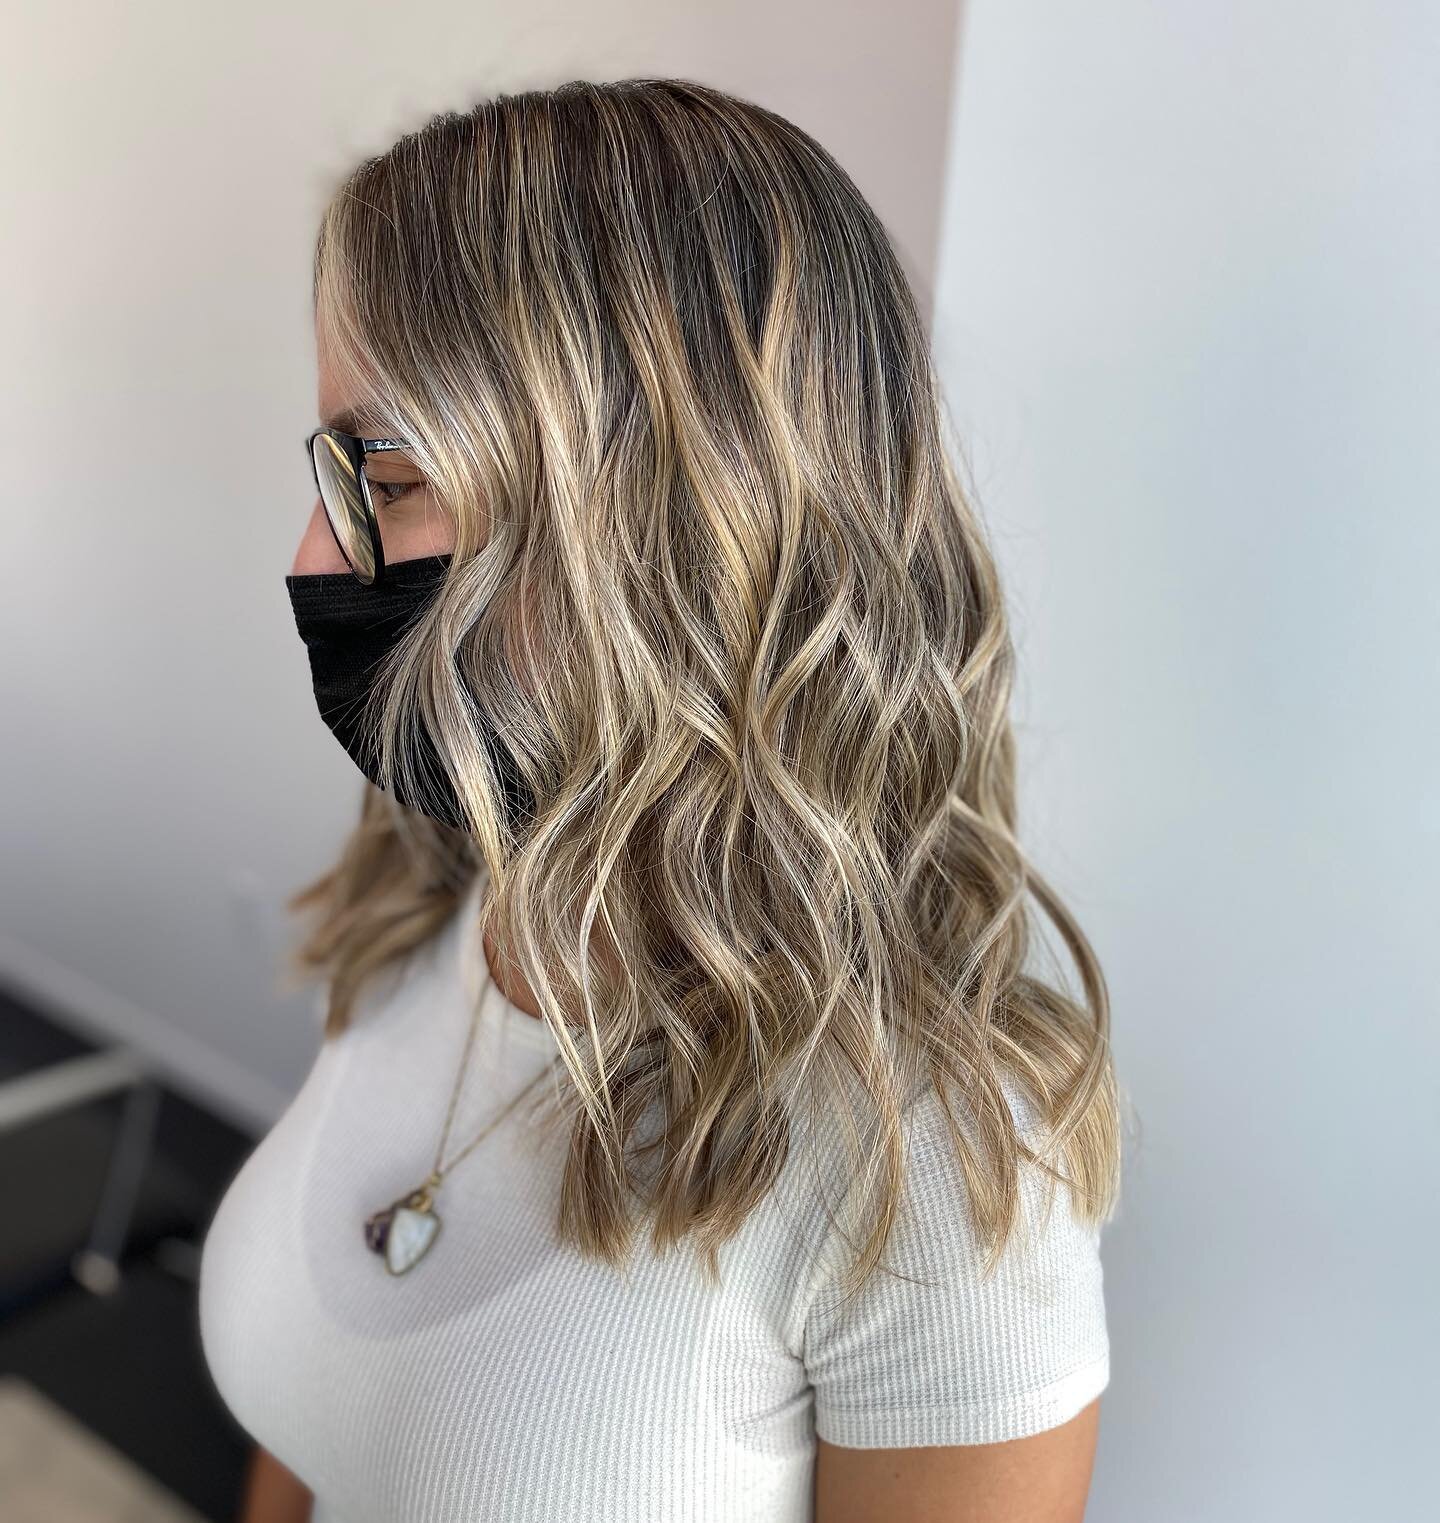 Salons might have to close in LA county again 😓 get an appointment on the books to secure your spot just in case and if we do close you&rsquo;ll have priority for when we reopen!! &bull;
&bull;
&bull;
&bull;
&bull;
&bull;
&bull;
&bull;
#hairbymacken